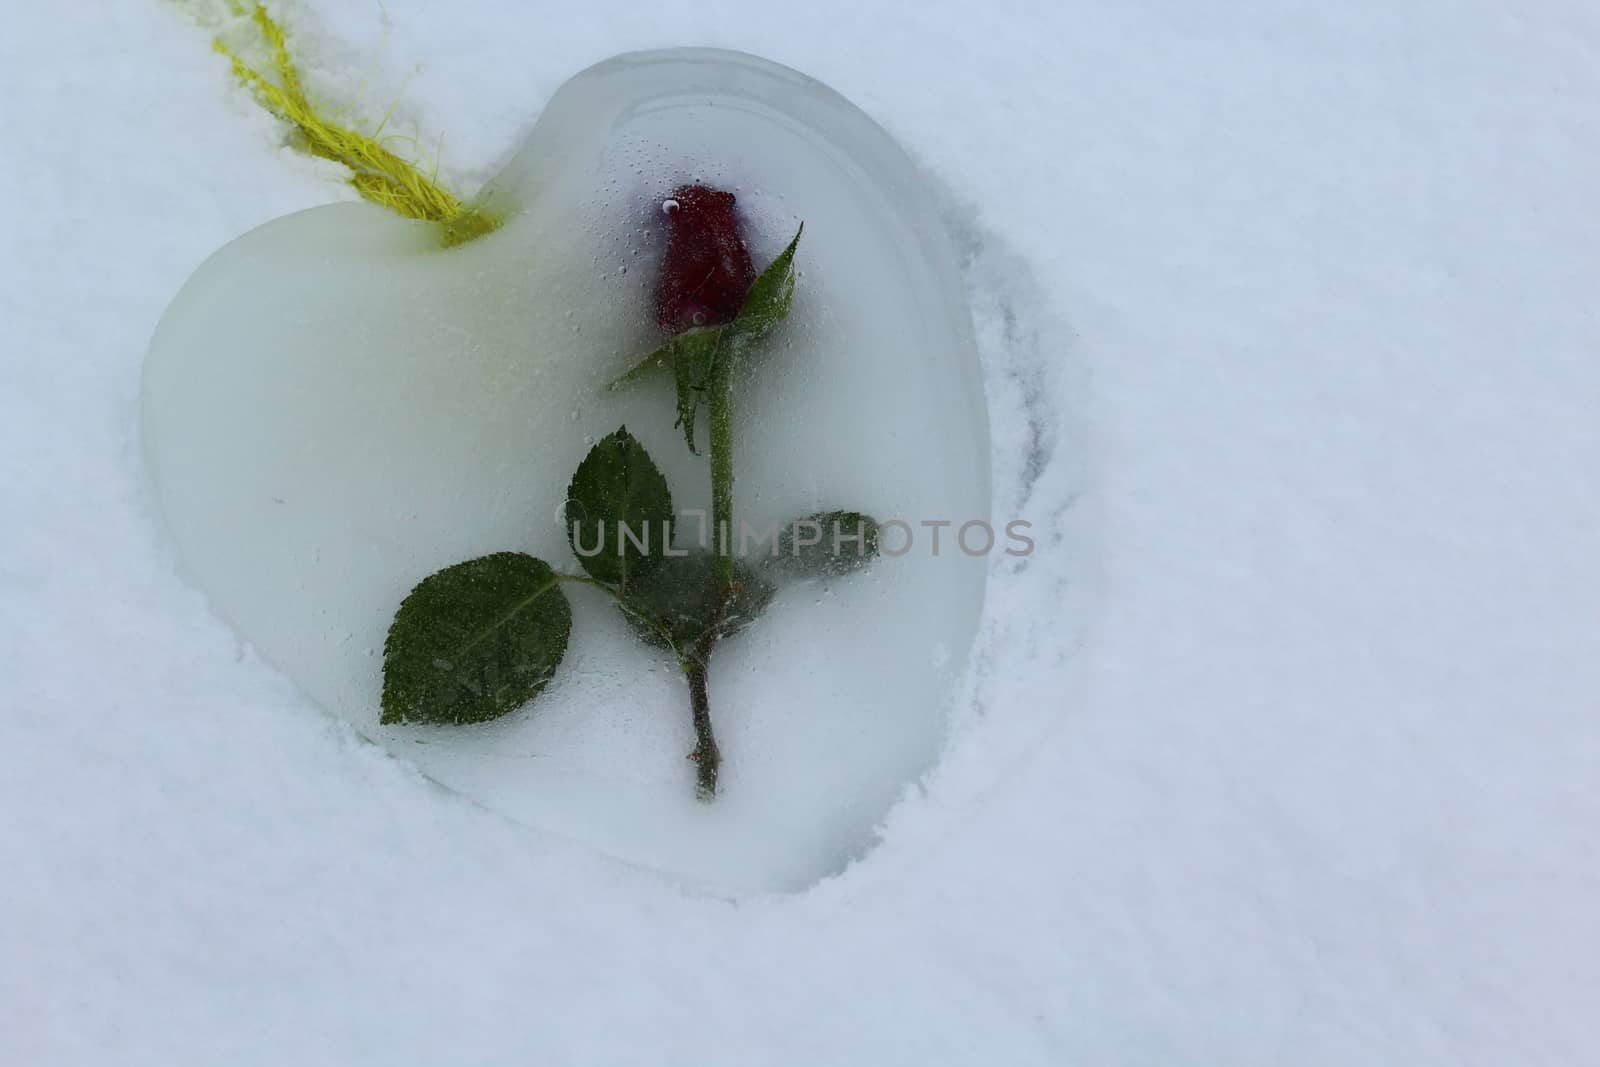 The picture shows an ice heart with a rose in the snow